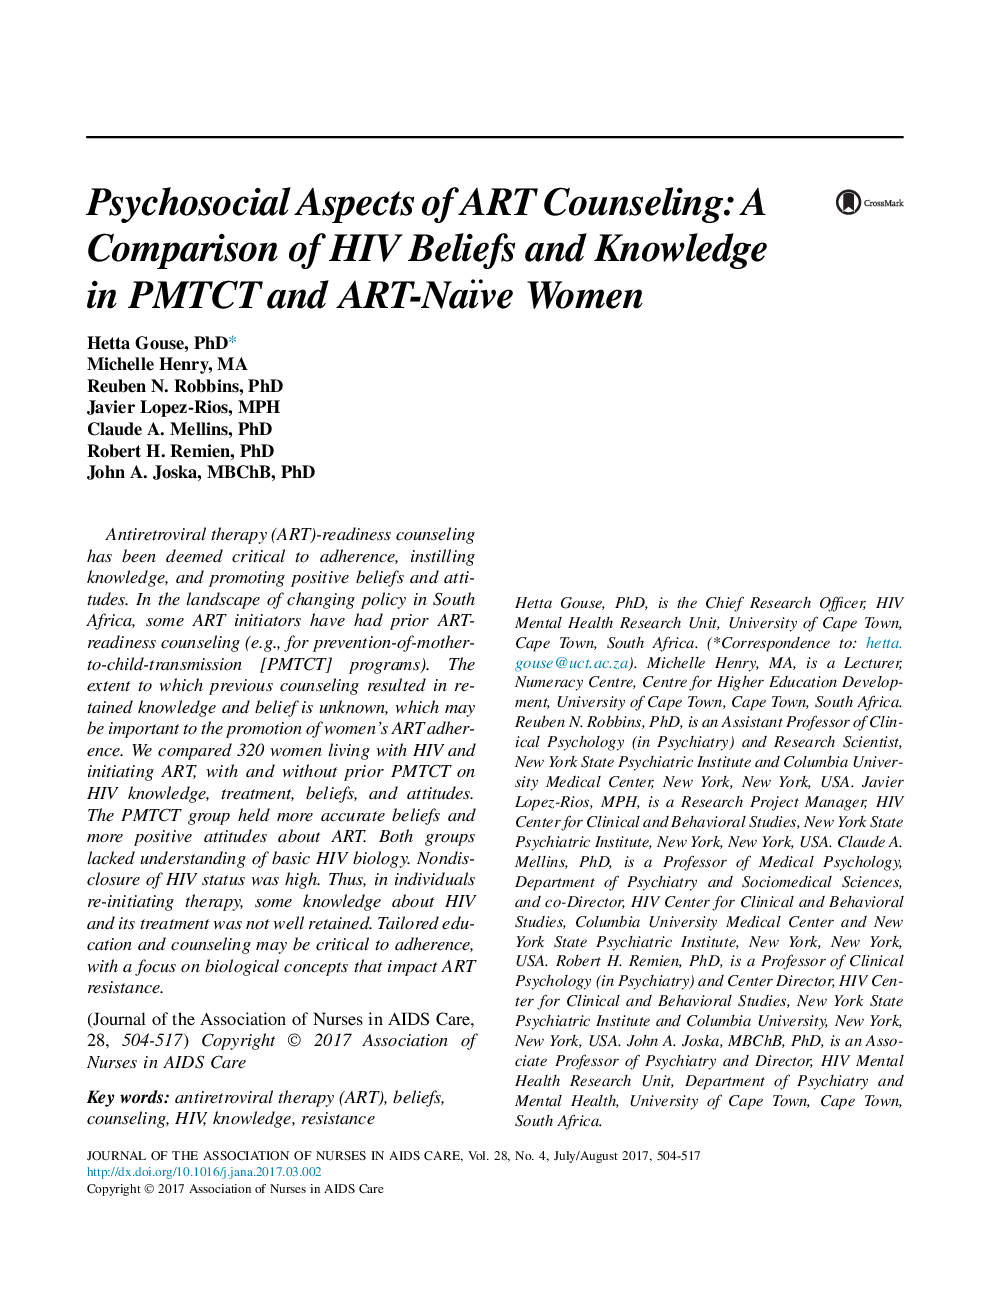 Psychosocial Aspects of ART Counseling: A Comparison of HIV Beliefs and Knowledge in PMTCT and ART-Naïve Women